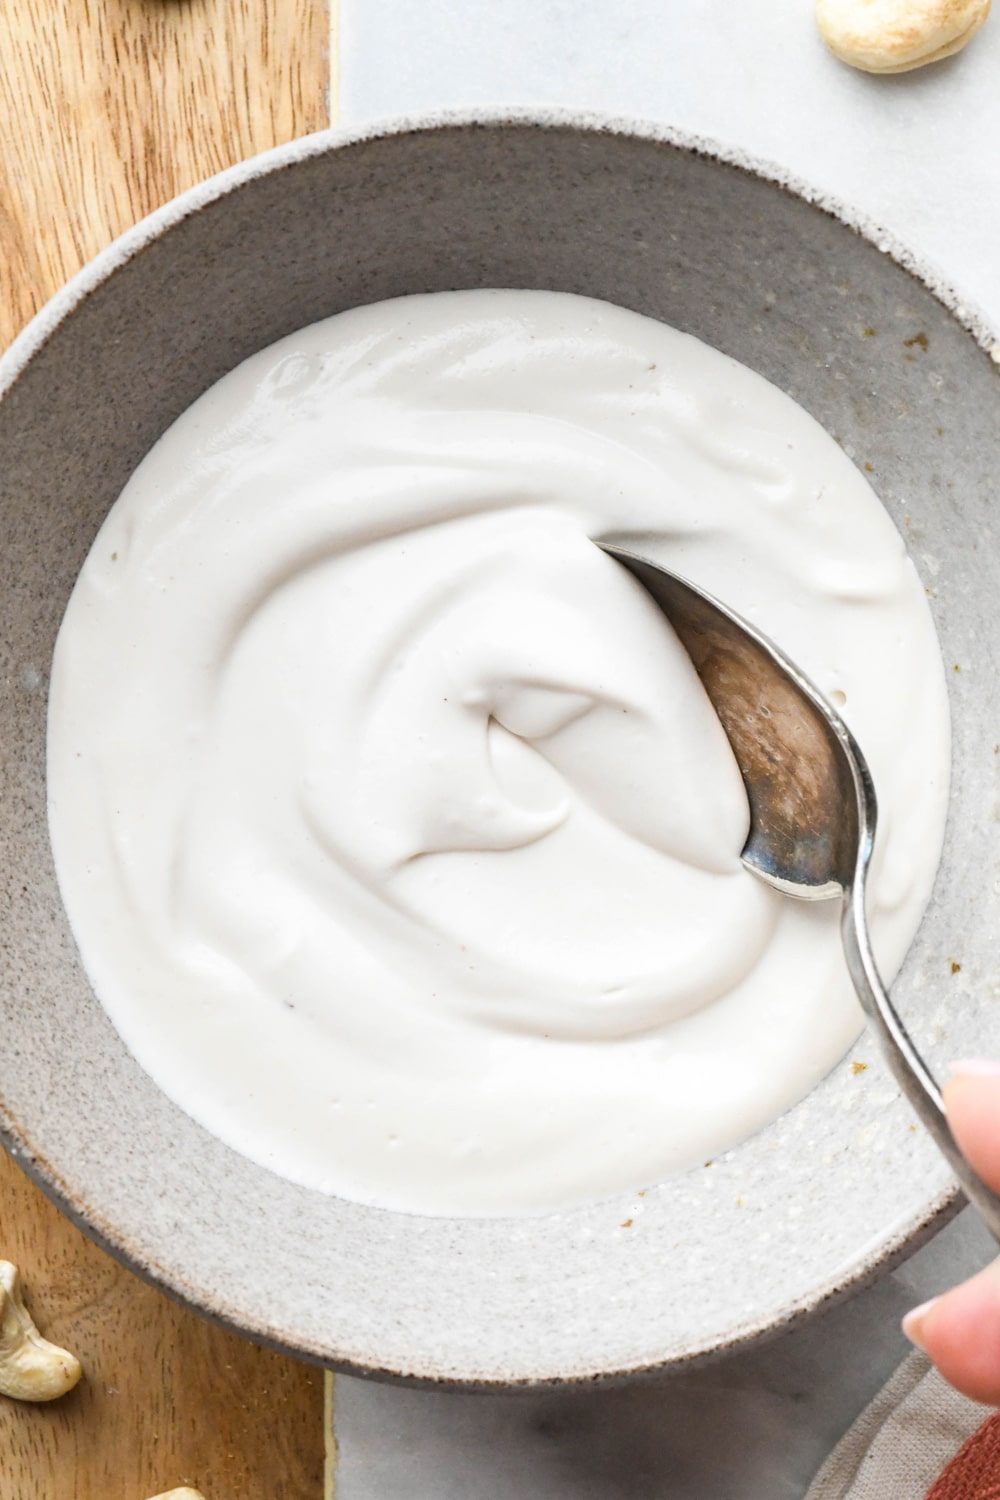 Thick and luscious cashew cream in a grey ceramic bowl, with a spoon dipping into the mixture to show the creamy texture.